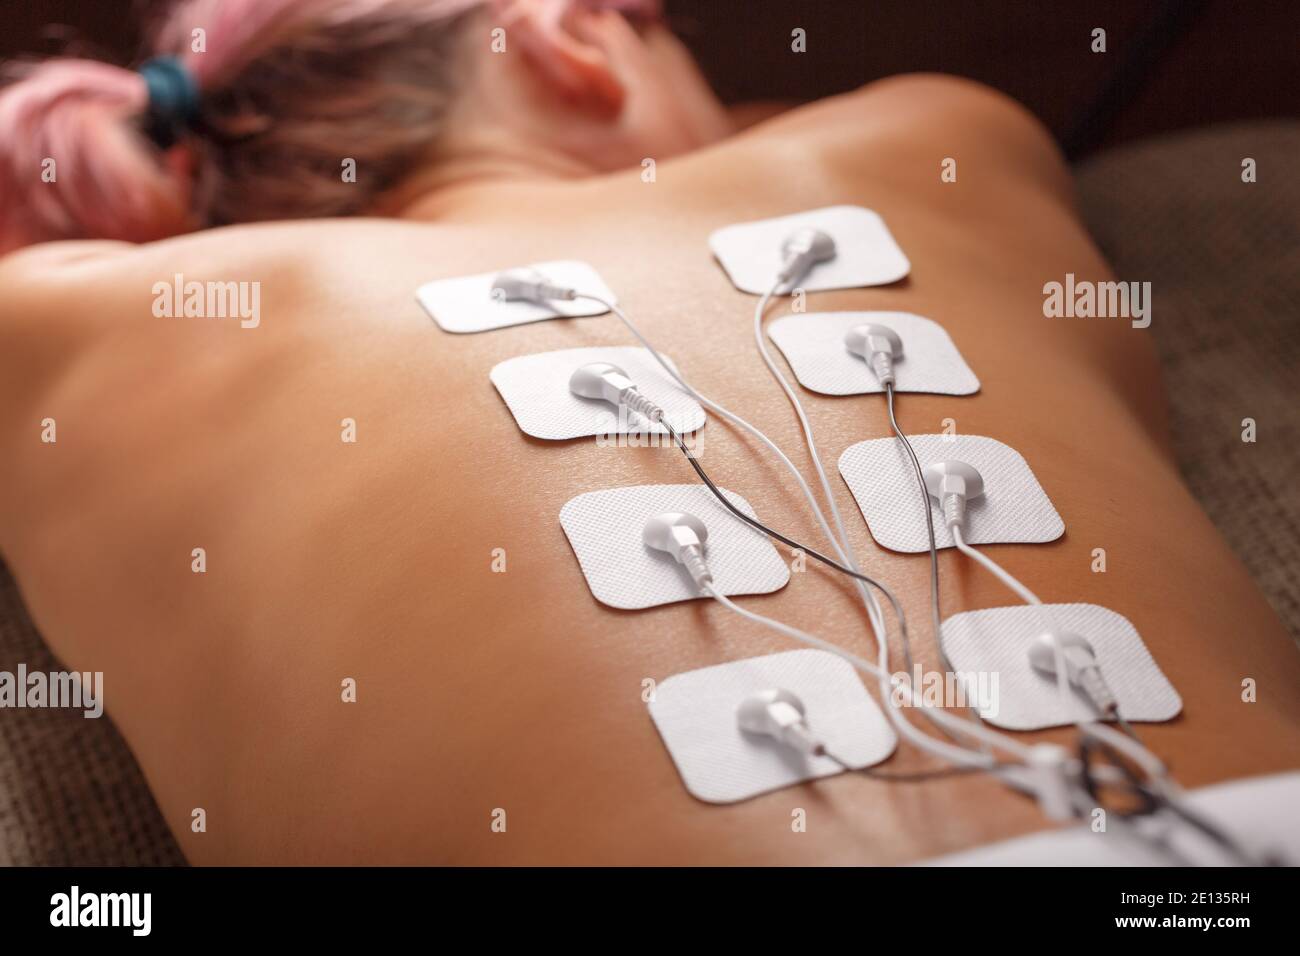 https://c8.alamy.com/comp/2E135RH/back-and-shoulder-massage-with-a-muscle-stimulator-with-attached-electrodes-along-the-spine-rehabilitation-and-treatment-weight-loss-2E135RH.jpg